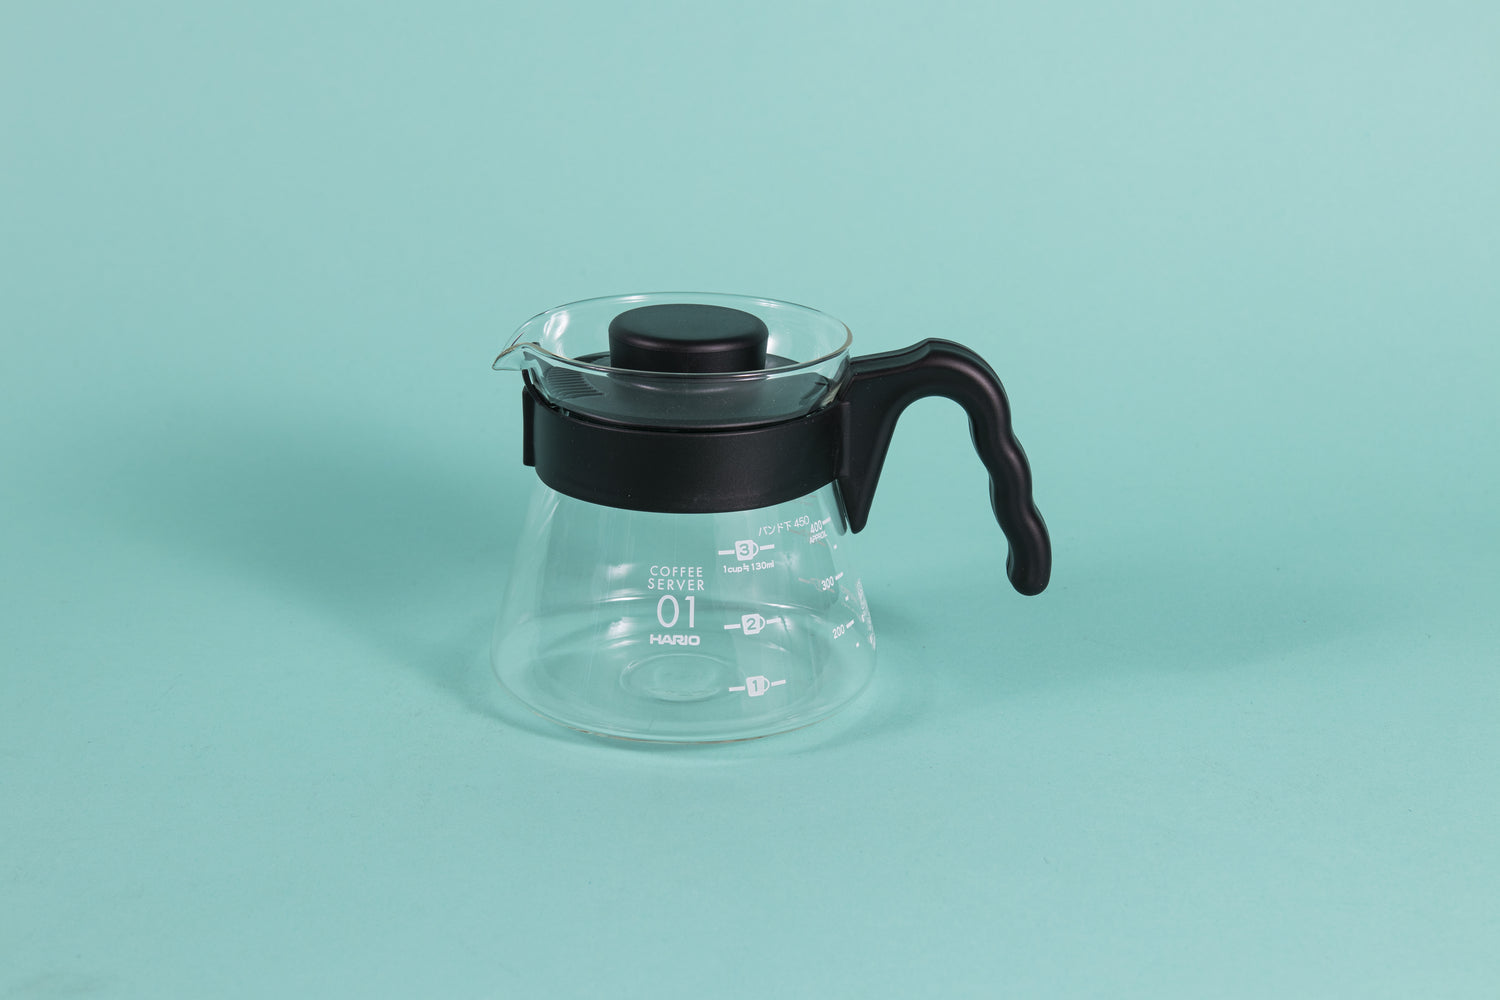 Glass coffee server with white text and level markings with black hard plastic handle and lid on a teal background.